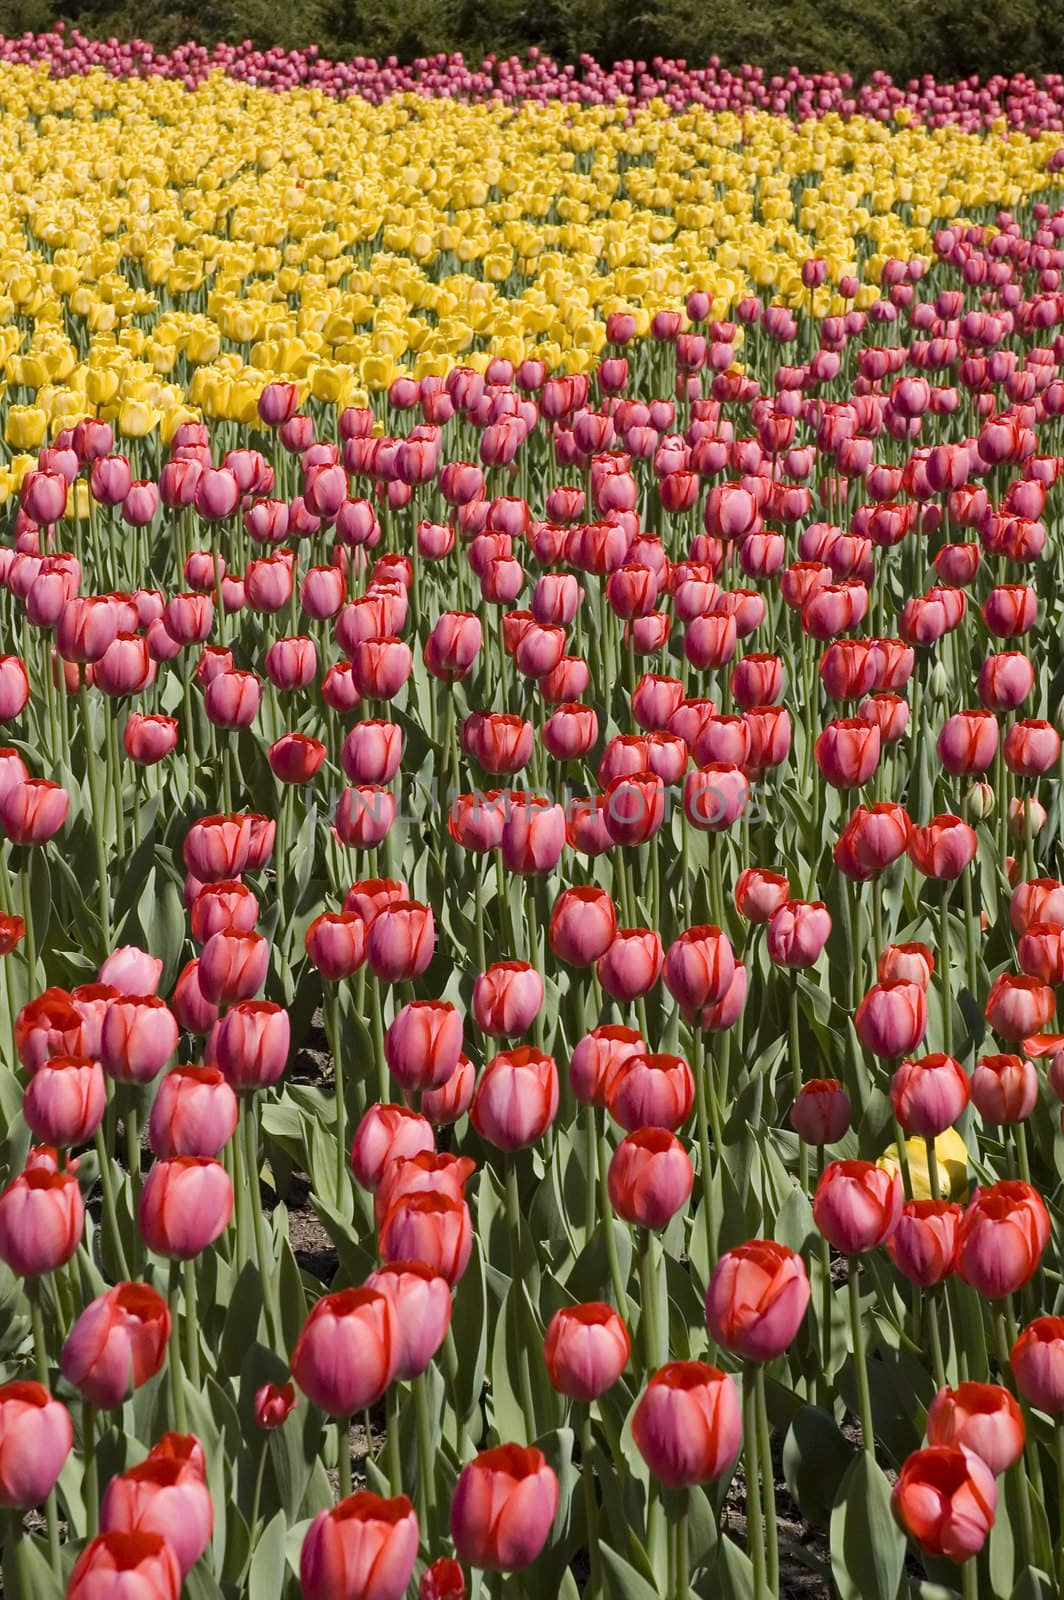 endless field of yellow and red tulips